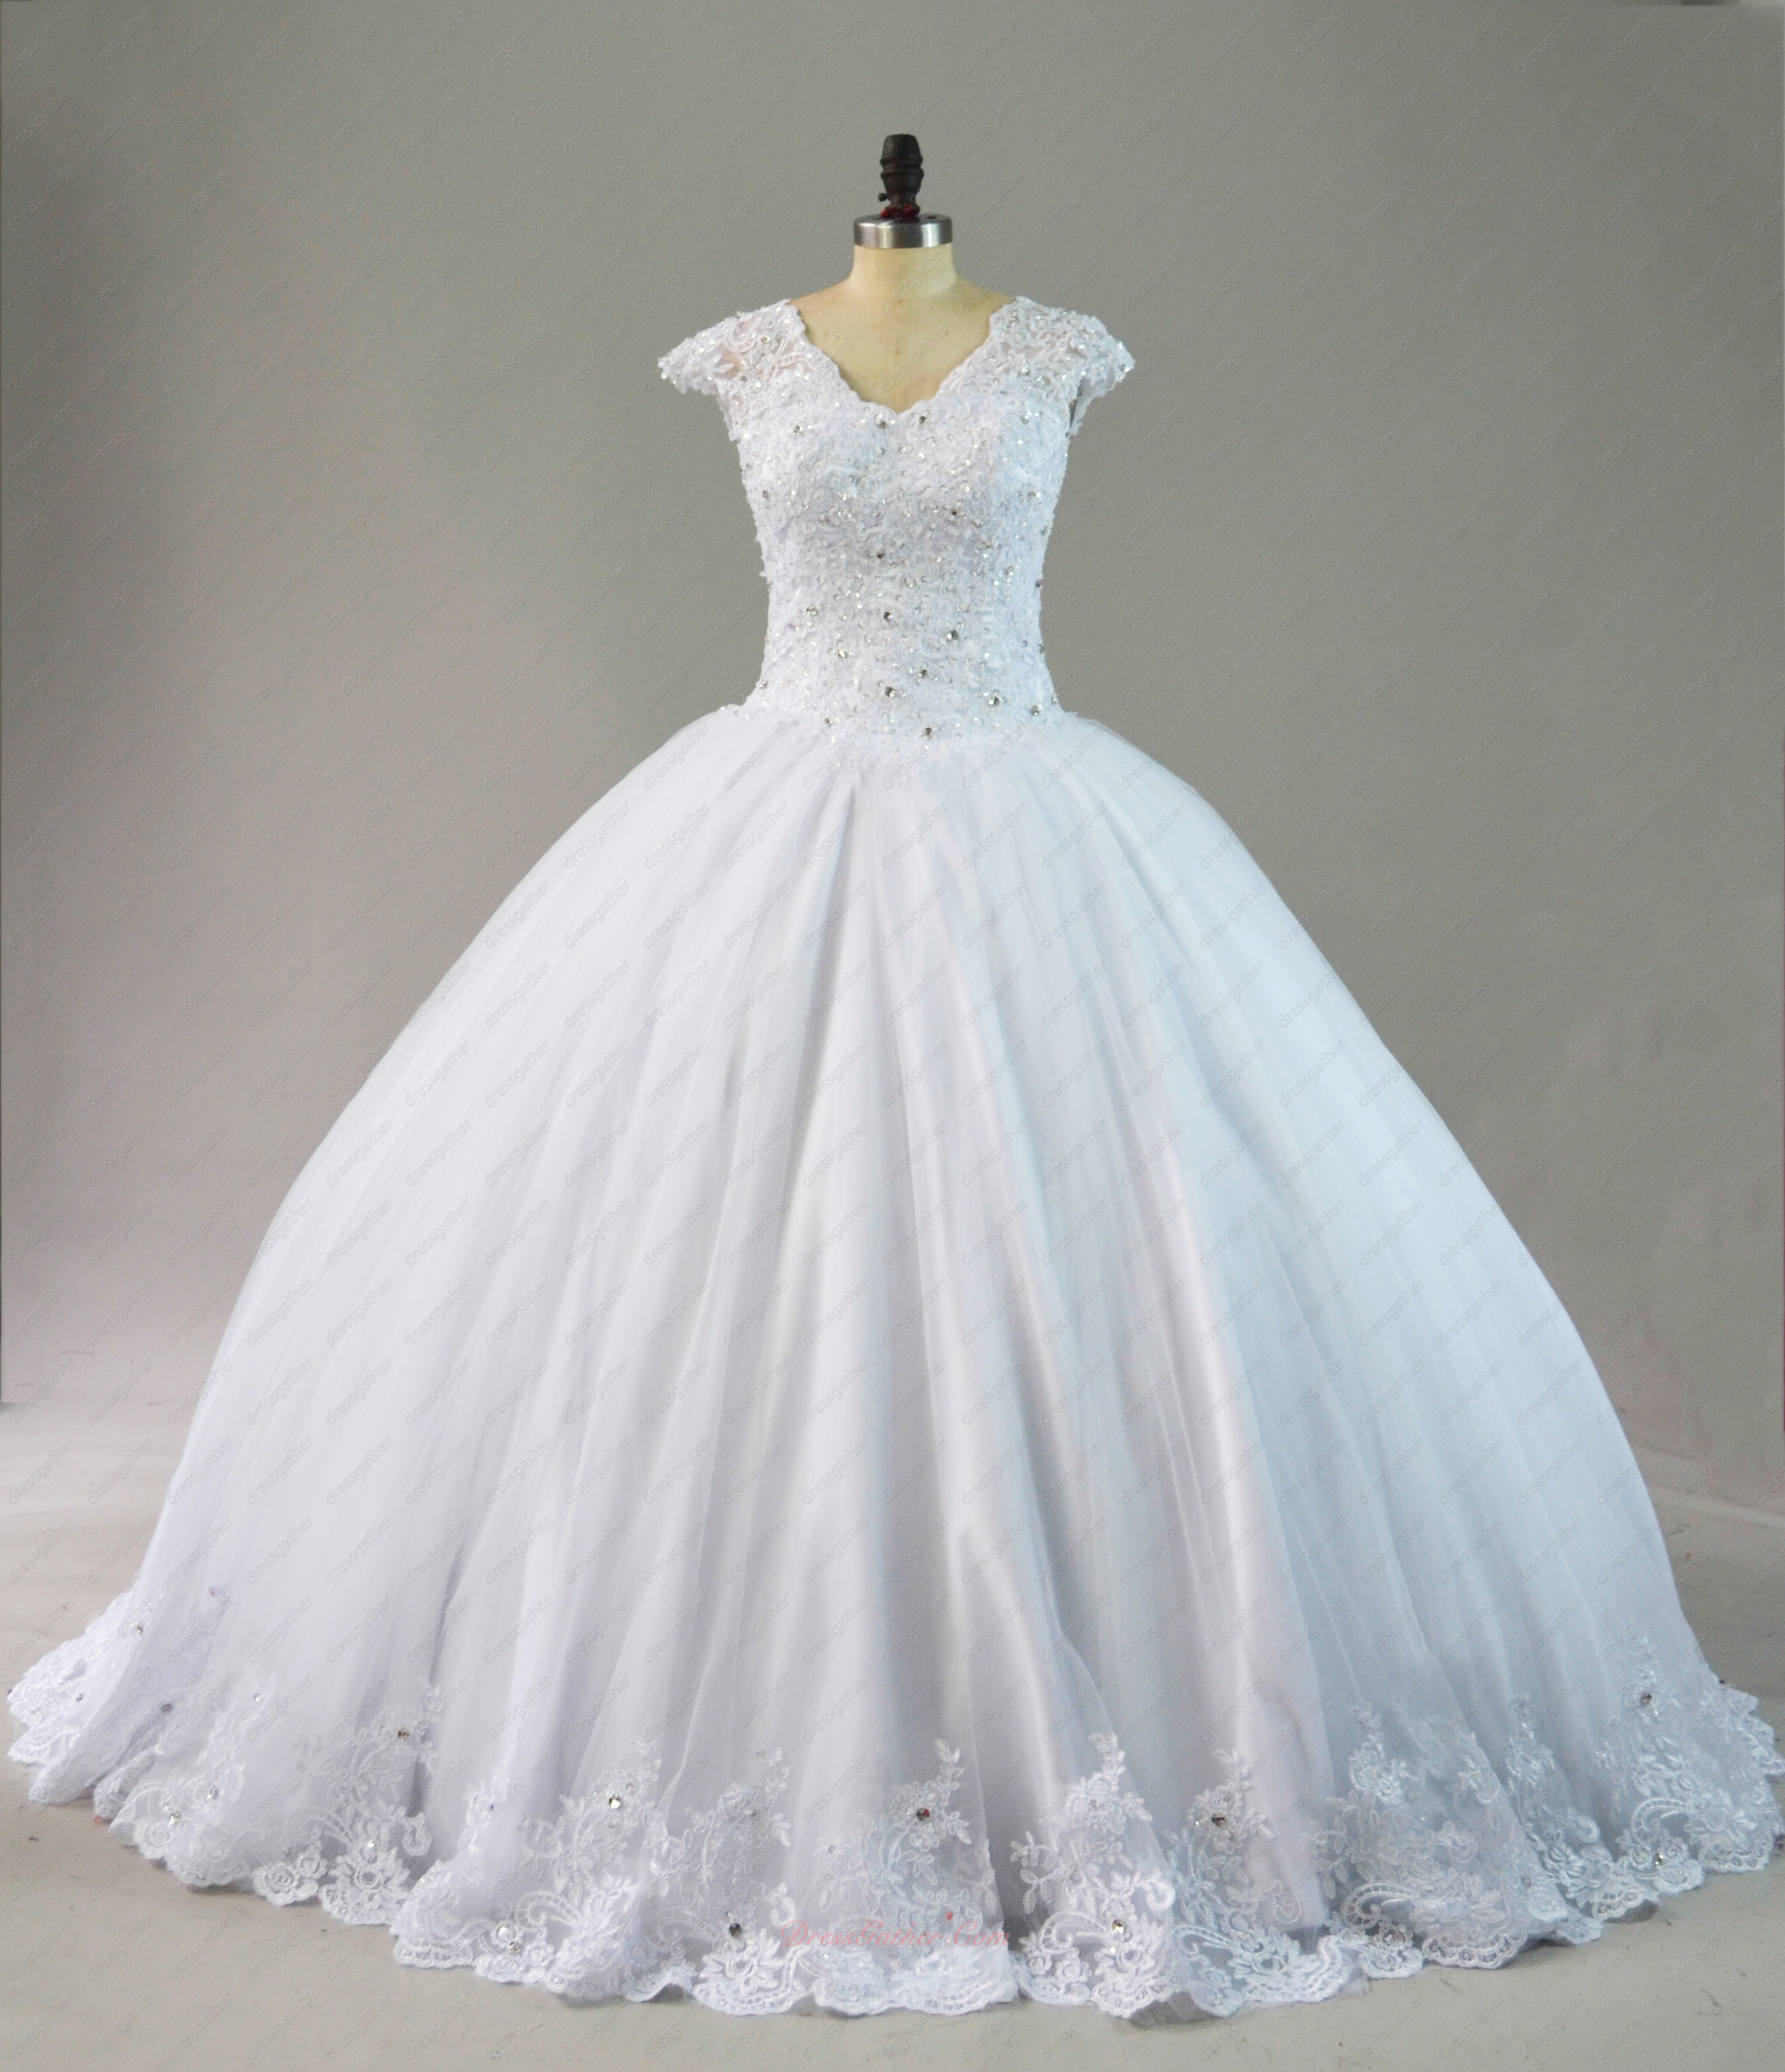 Affordable White Falt Wedding Ball Gowns Puffy With Lace Hemlines - Click Image to Close